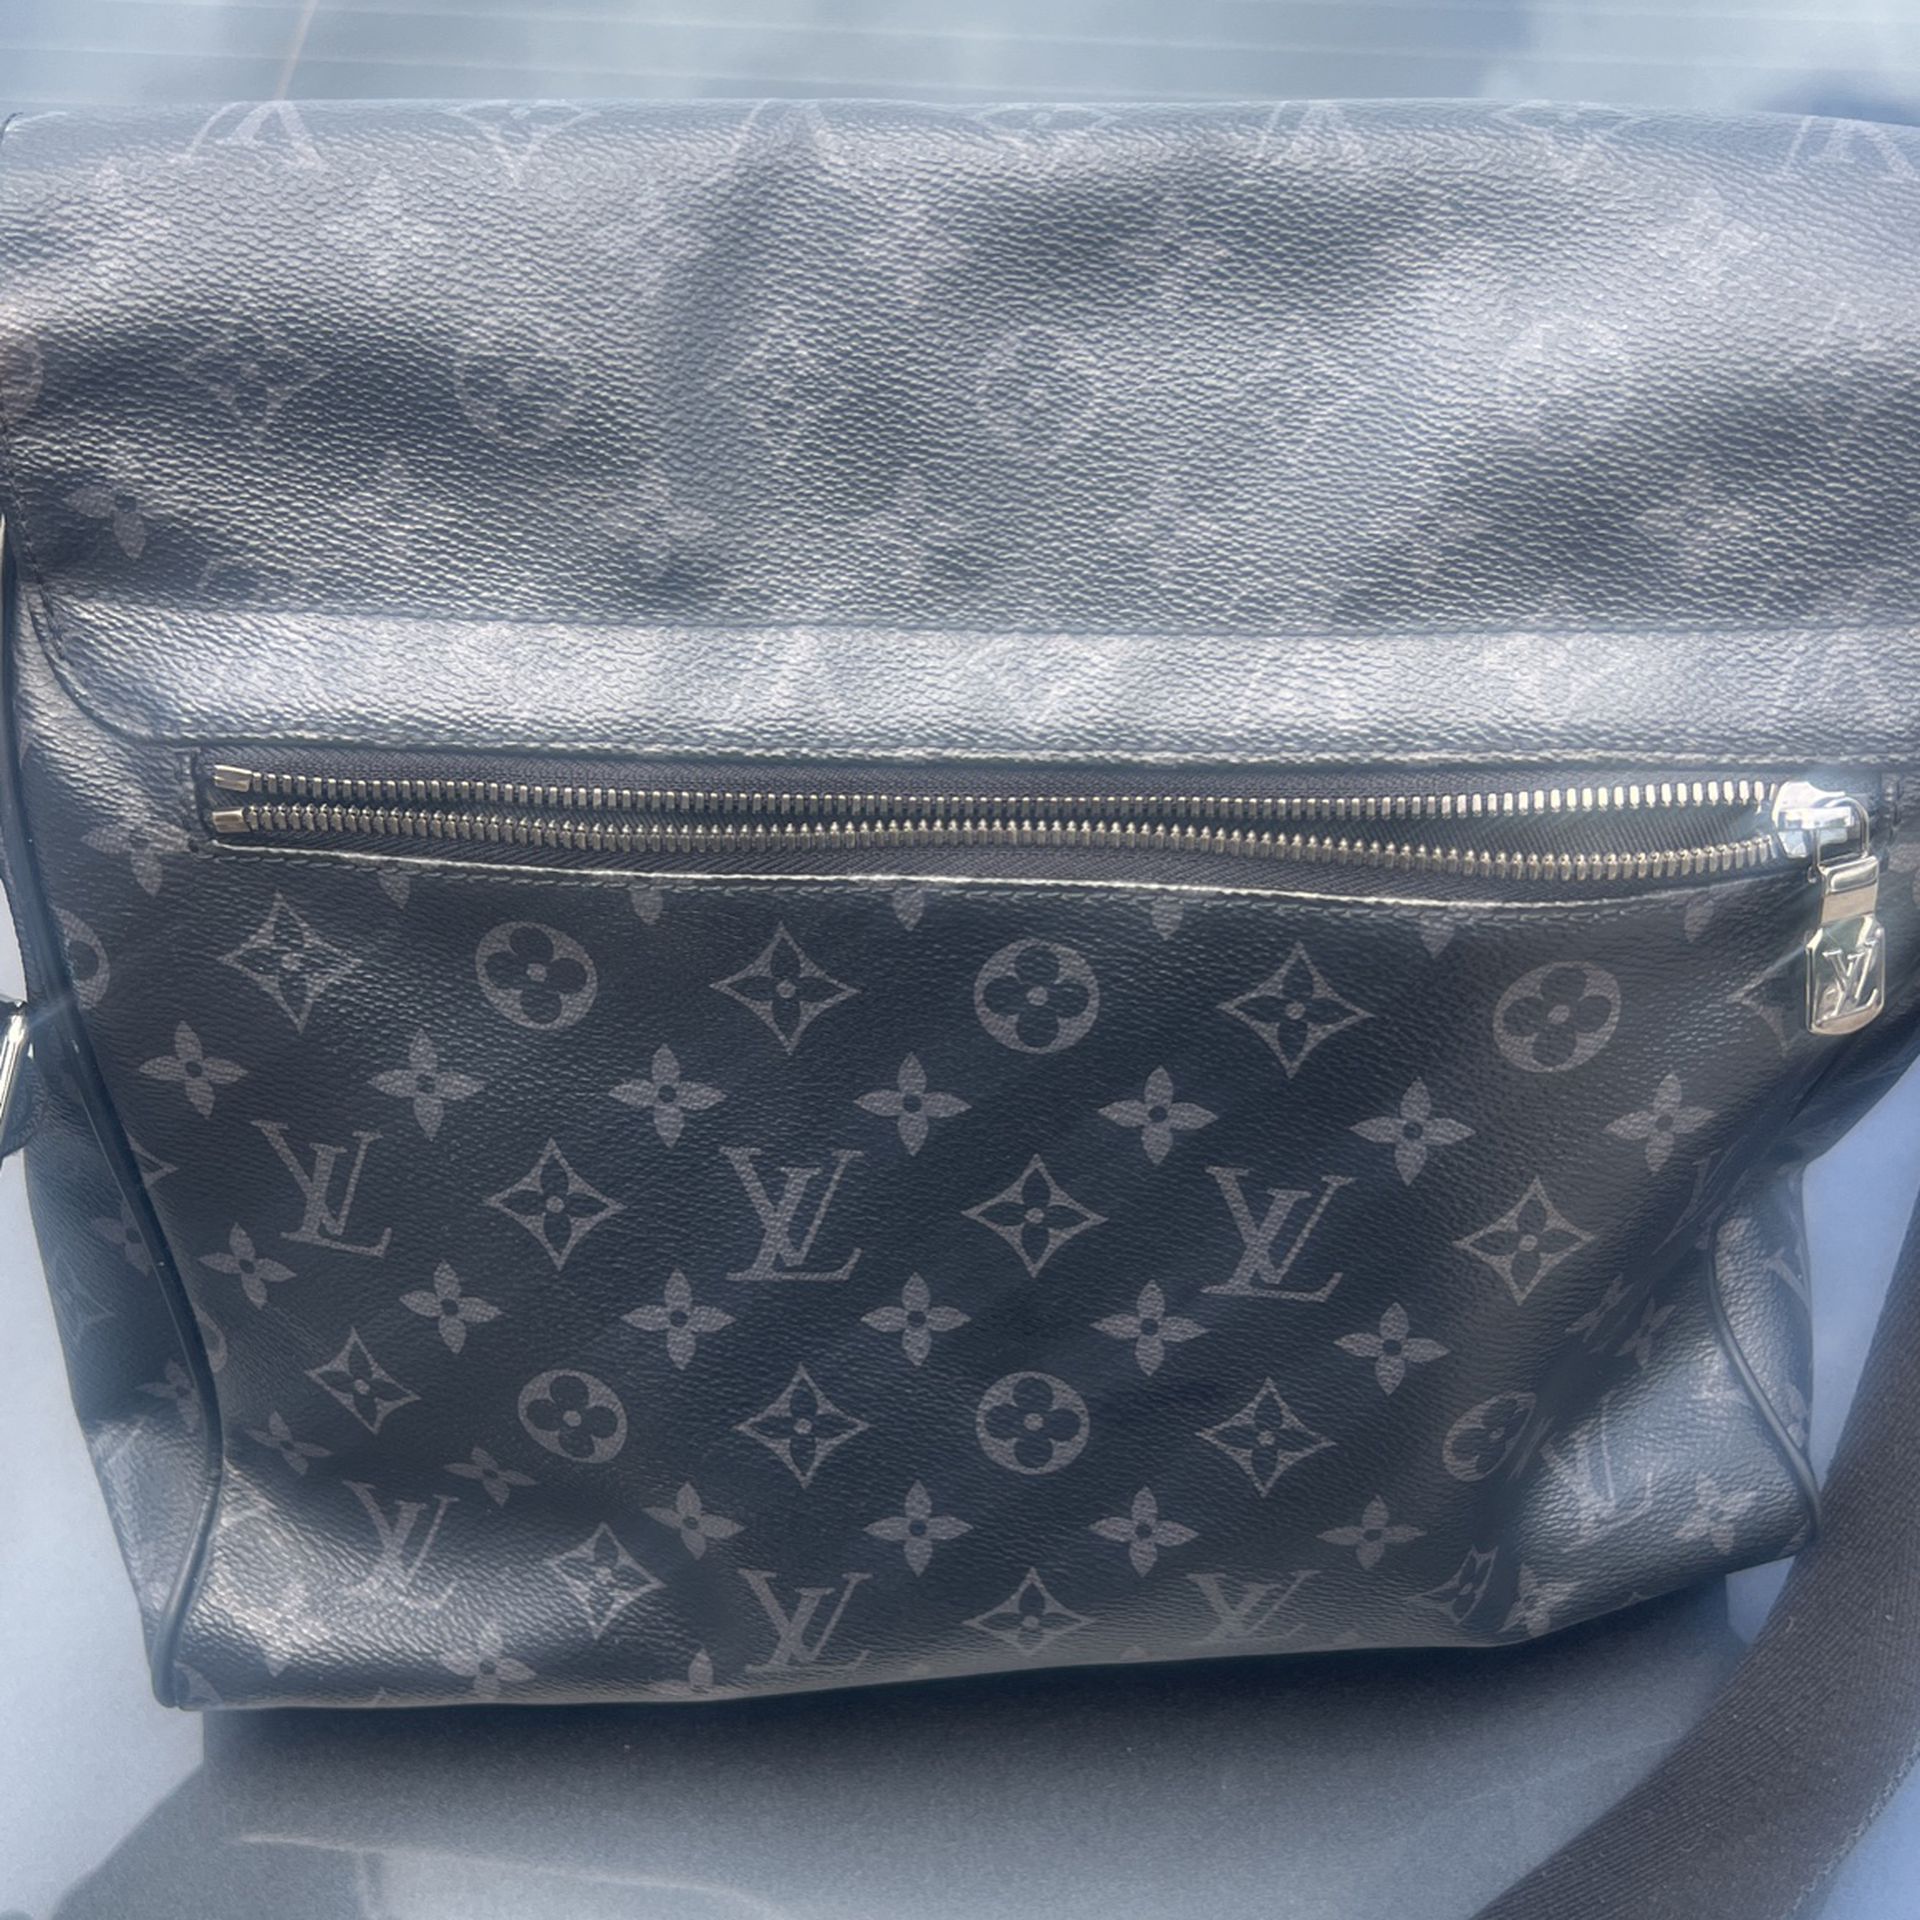 Authentic Louis Vuitton classic color crossbody bag, leather shoulder bag,  envelope bag. Sold at low price for Sale in Jackson, MI - OfferUp